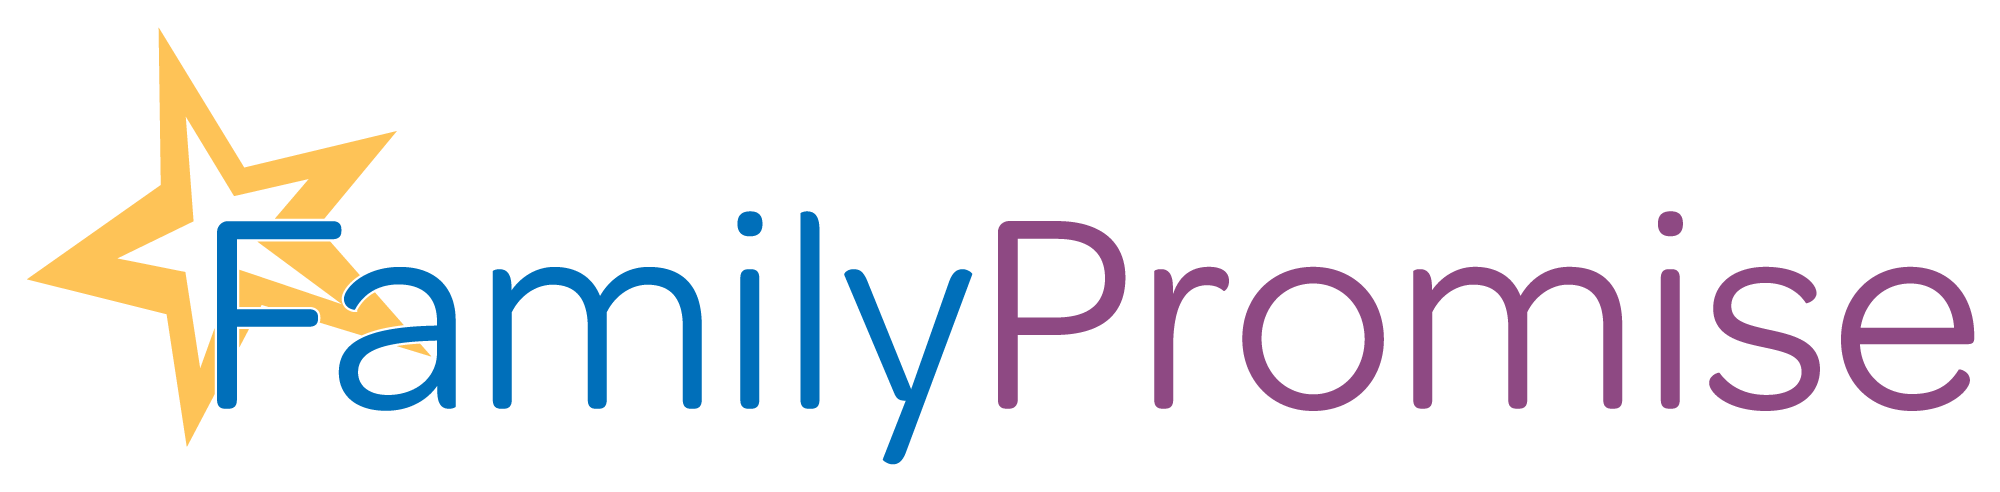 FamilyPromise logo, Home page